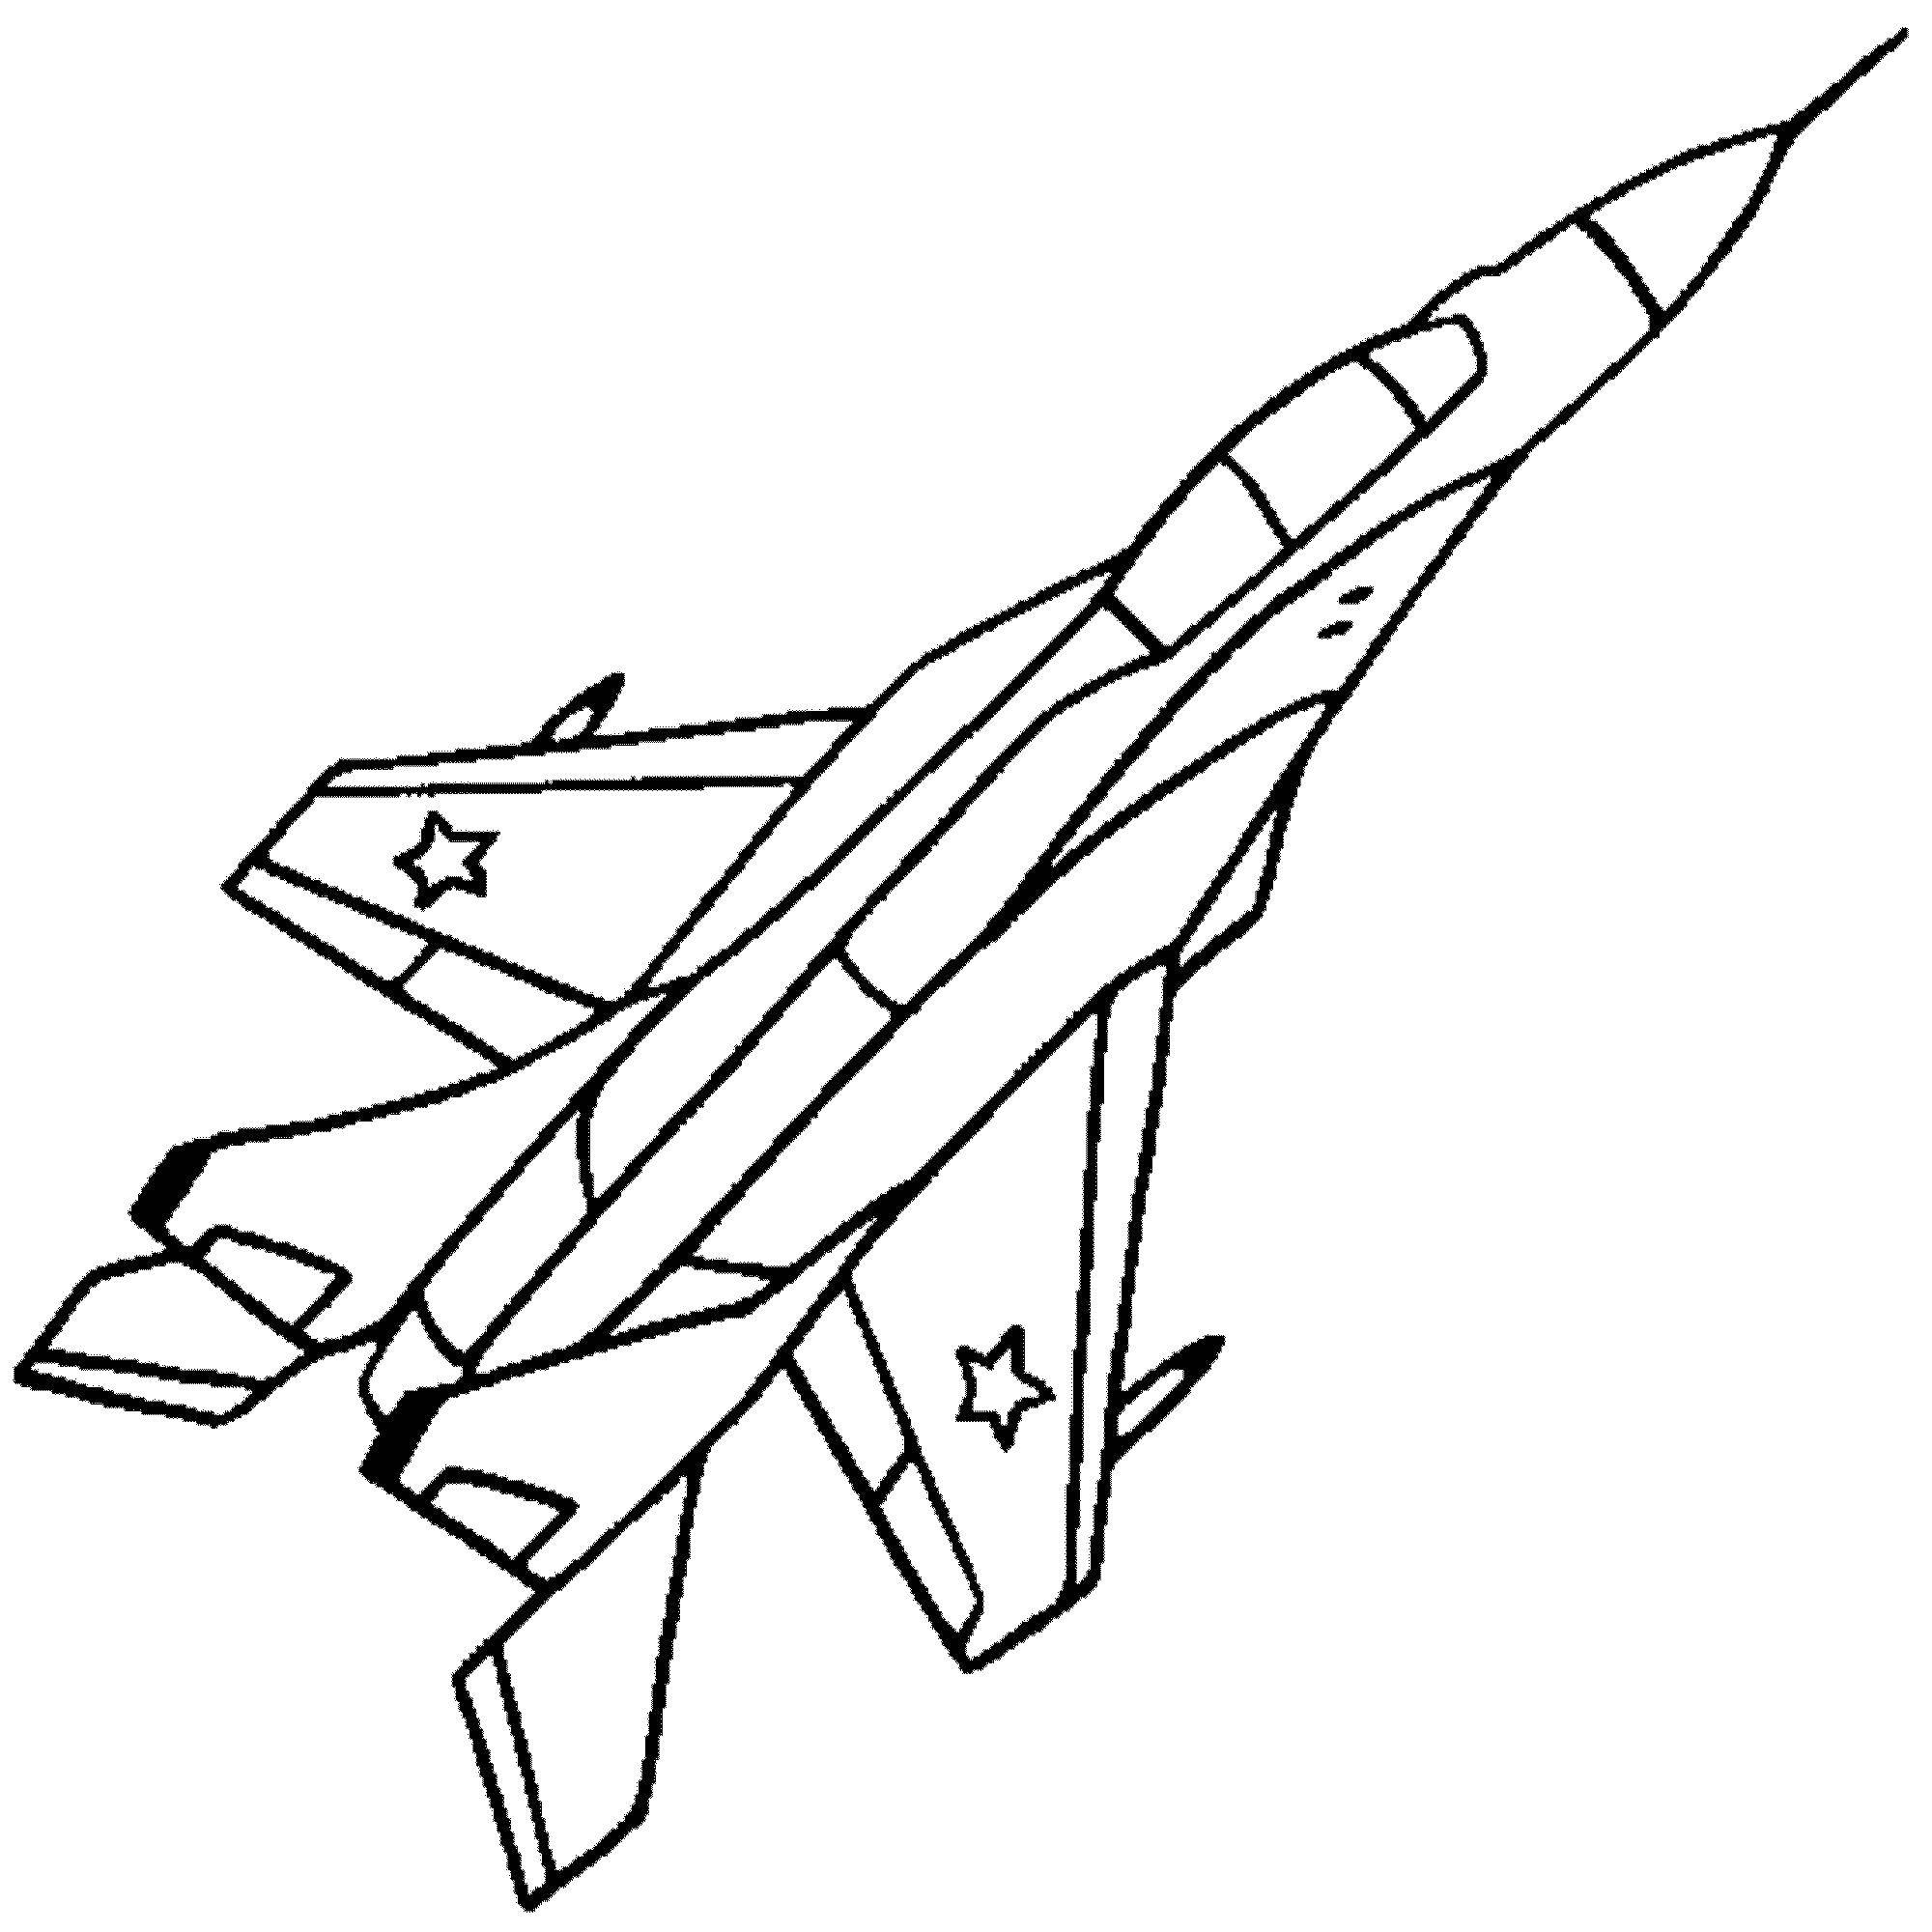 Coloring Jet. Category The planes. Tags:  Aircraft, fighter.